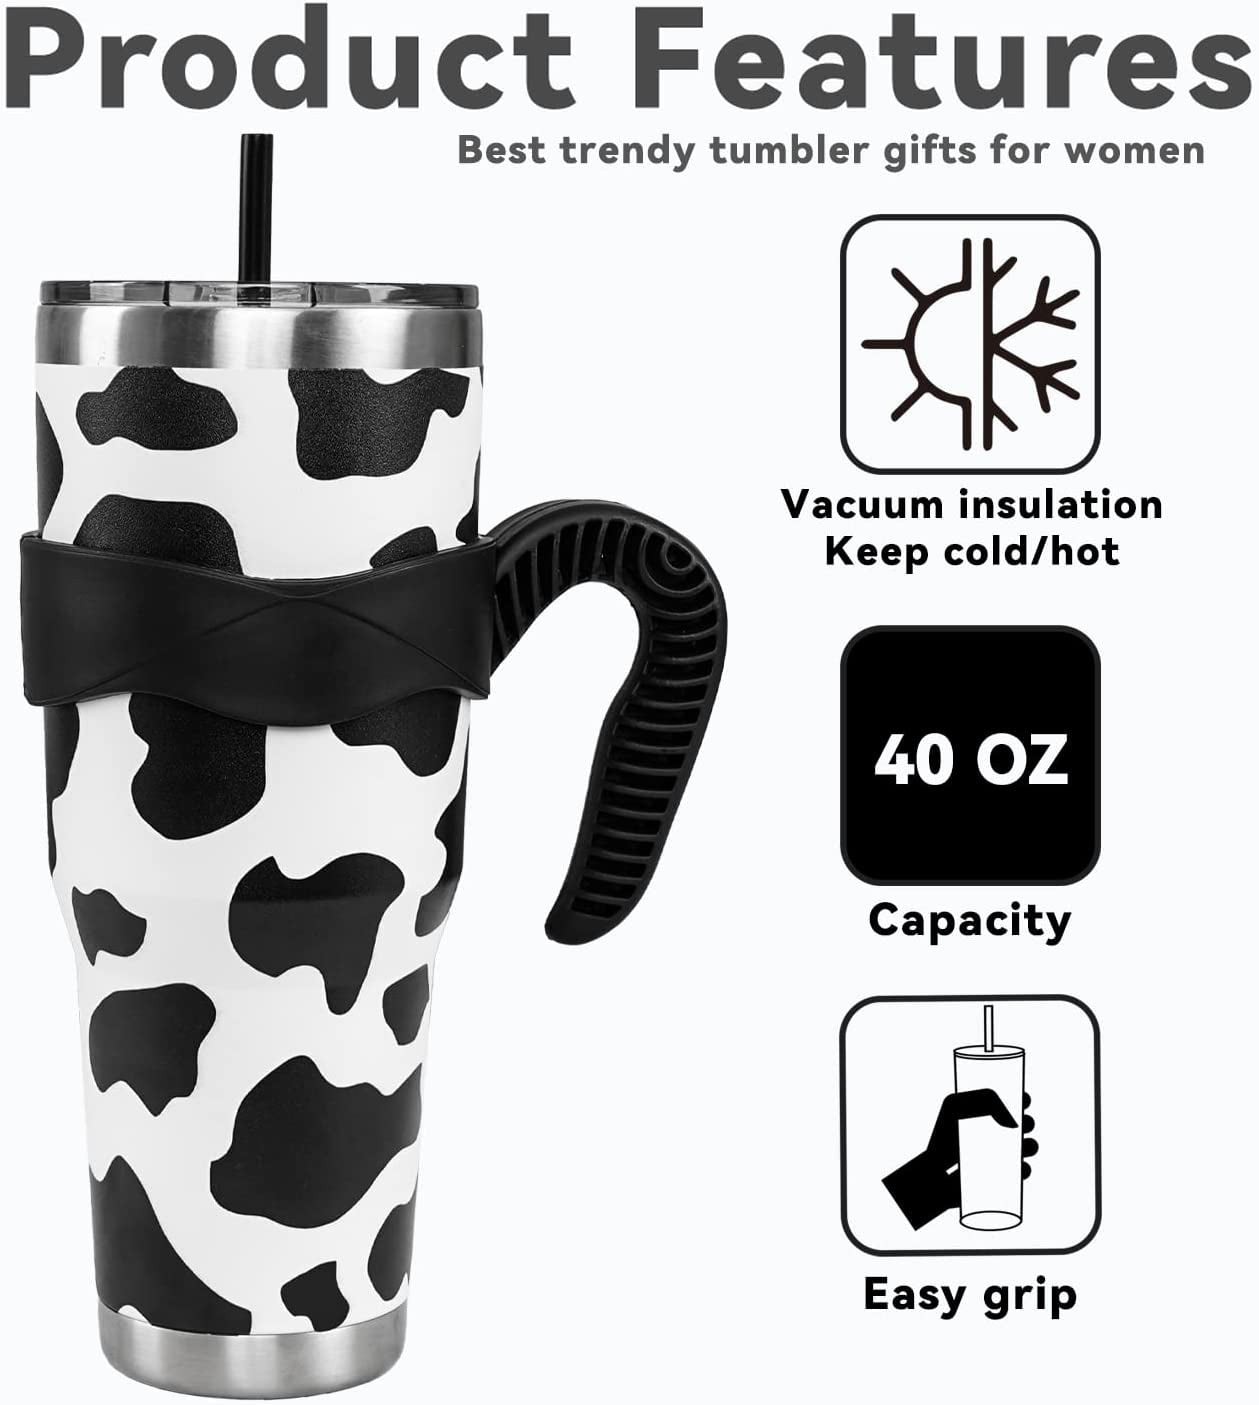 Heqianco 40 oz Tumbler with Handle and Straw Cow Tumbler Brown Cow Gifts for Women 40 oz Cup Leak Proof Cow Print Stuff Insulated Stainless Steel